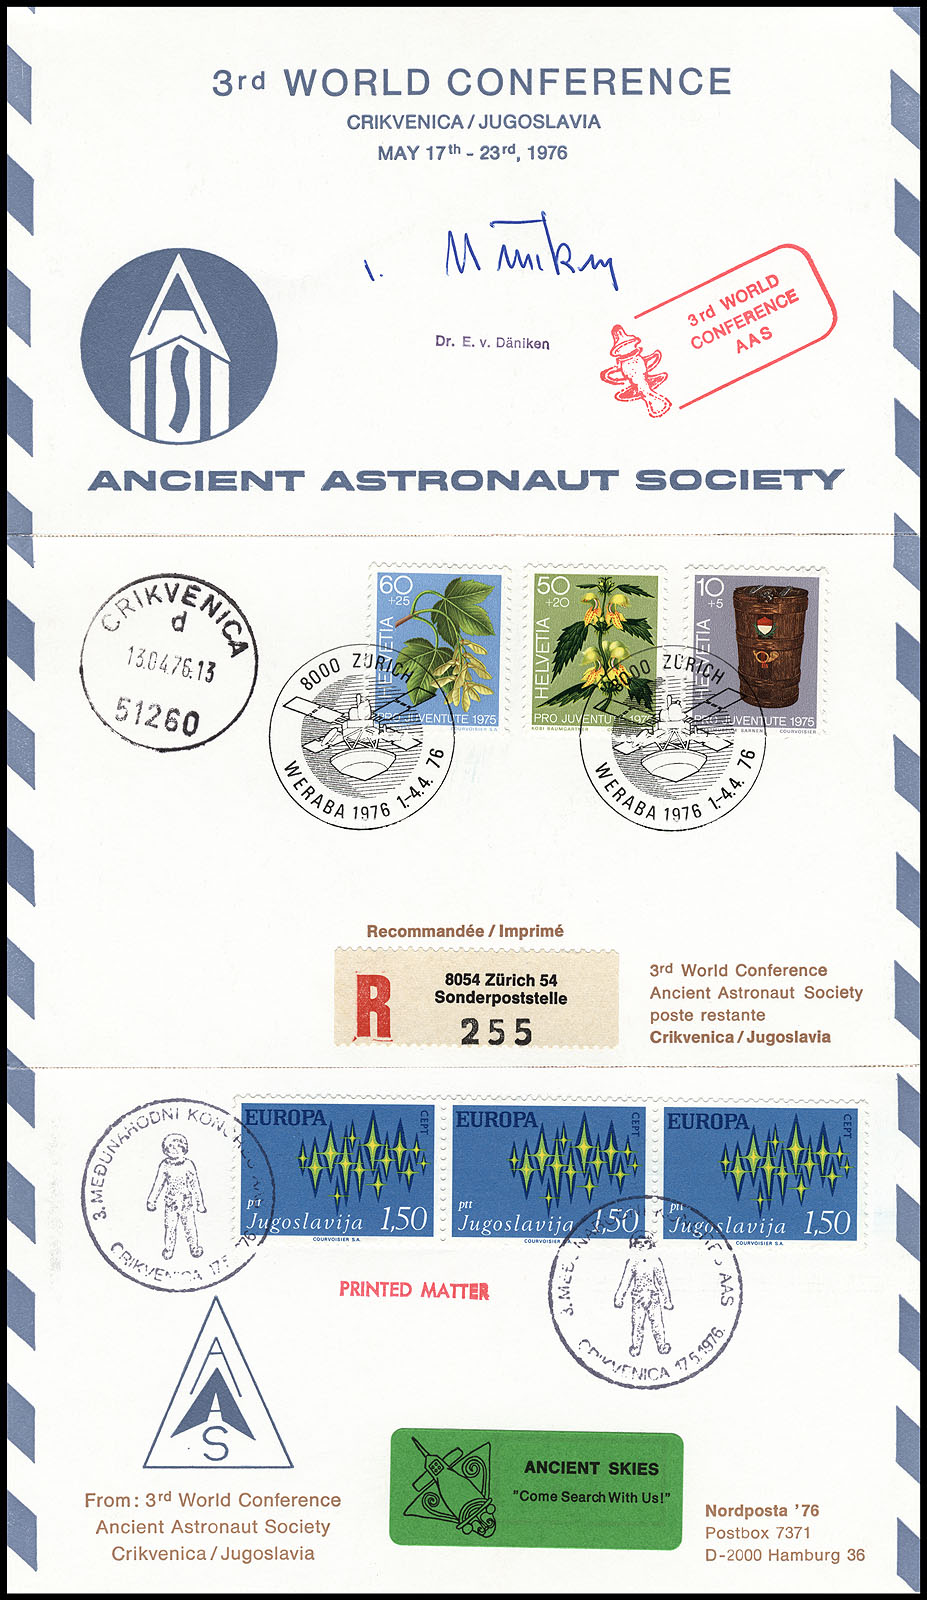 http://www.fandom.ru/about_fan/stamps/cover_yugoslavia_1976_ancent_astronomy_can_crikvenica_1976_05_17.jpg